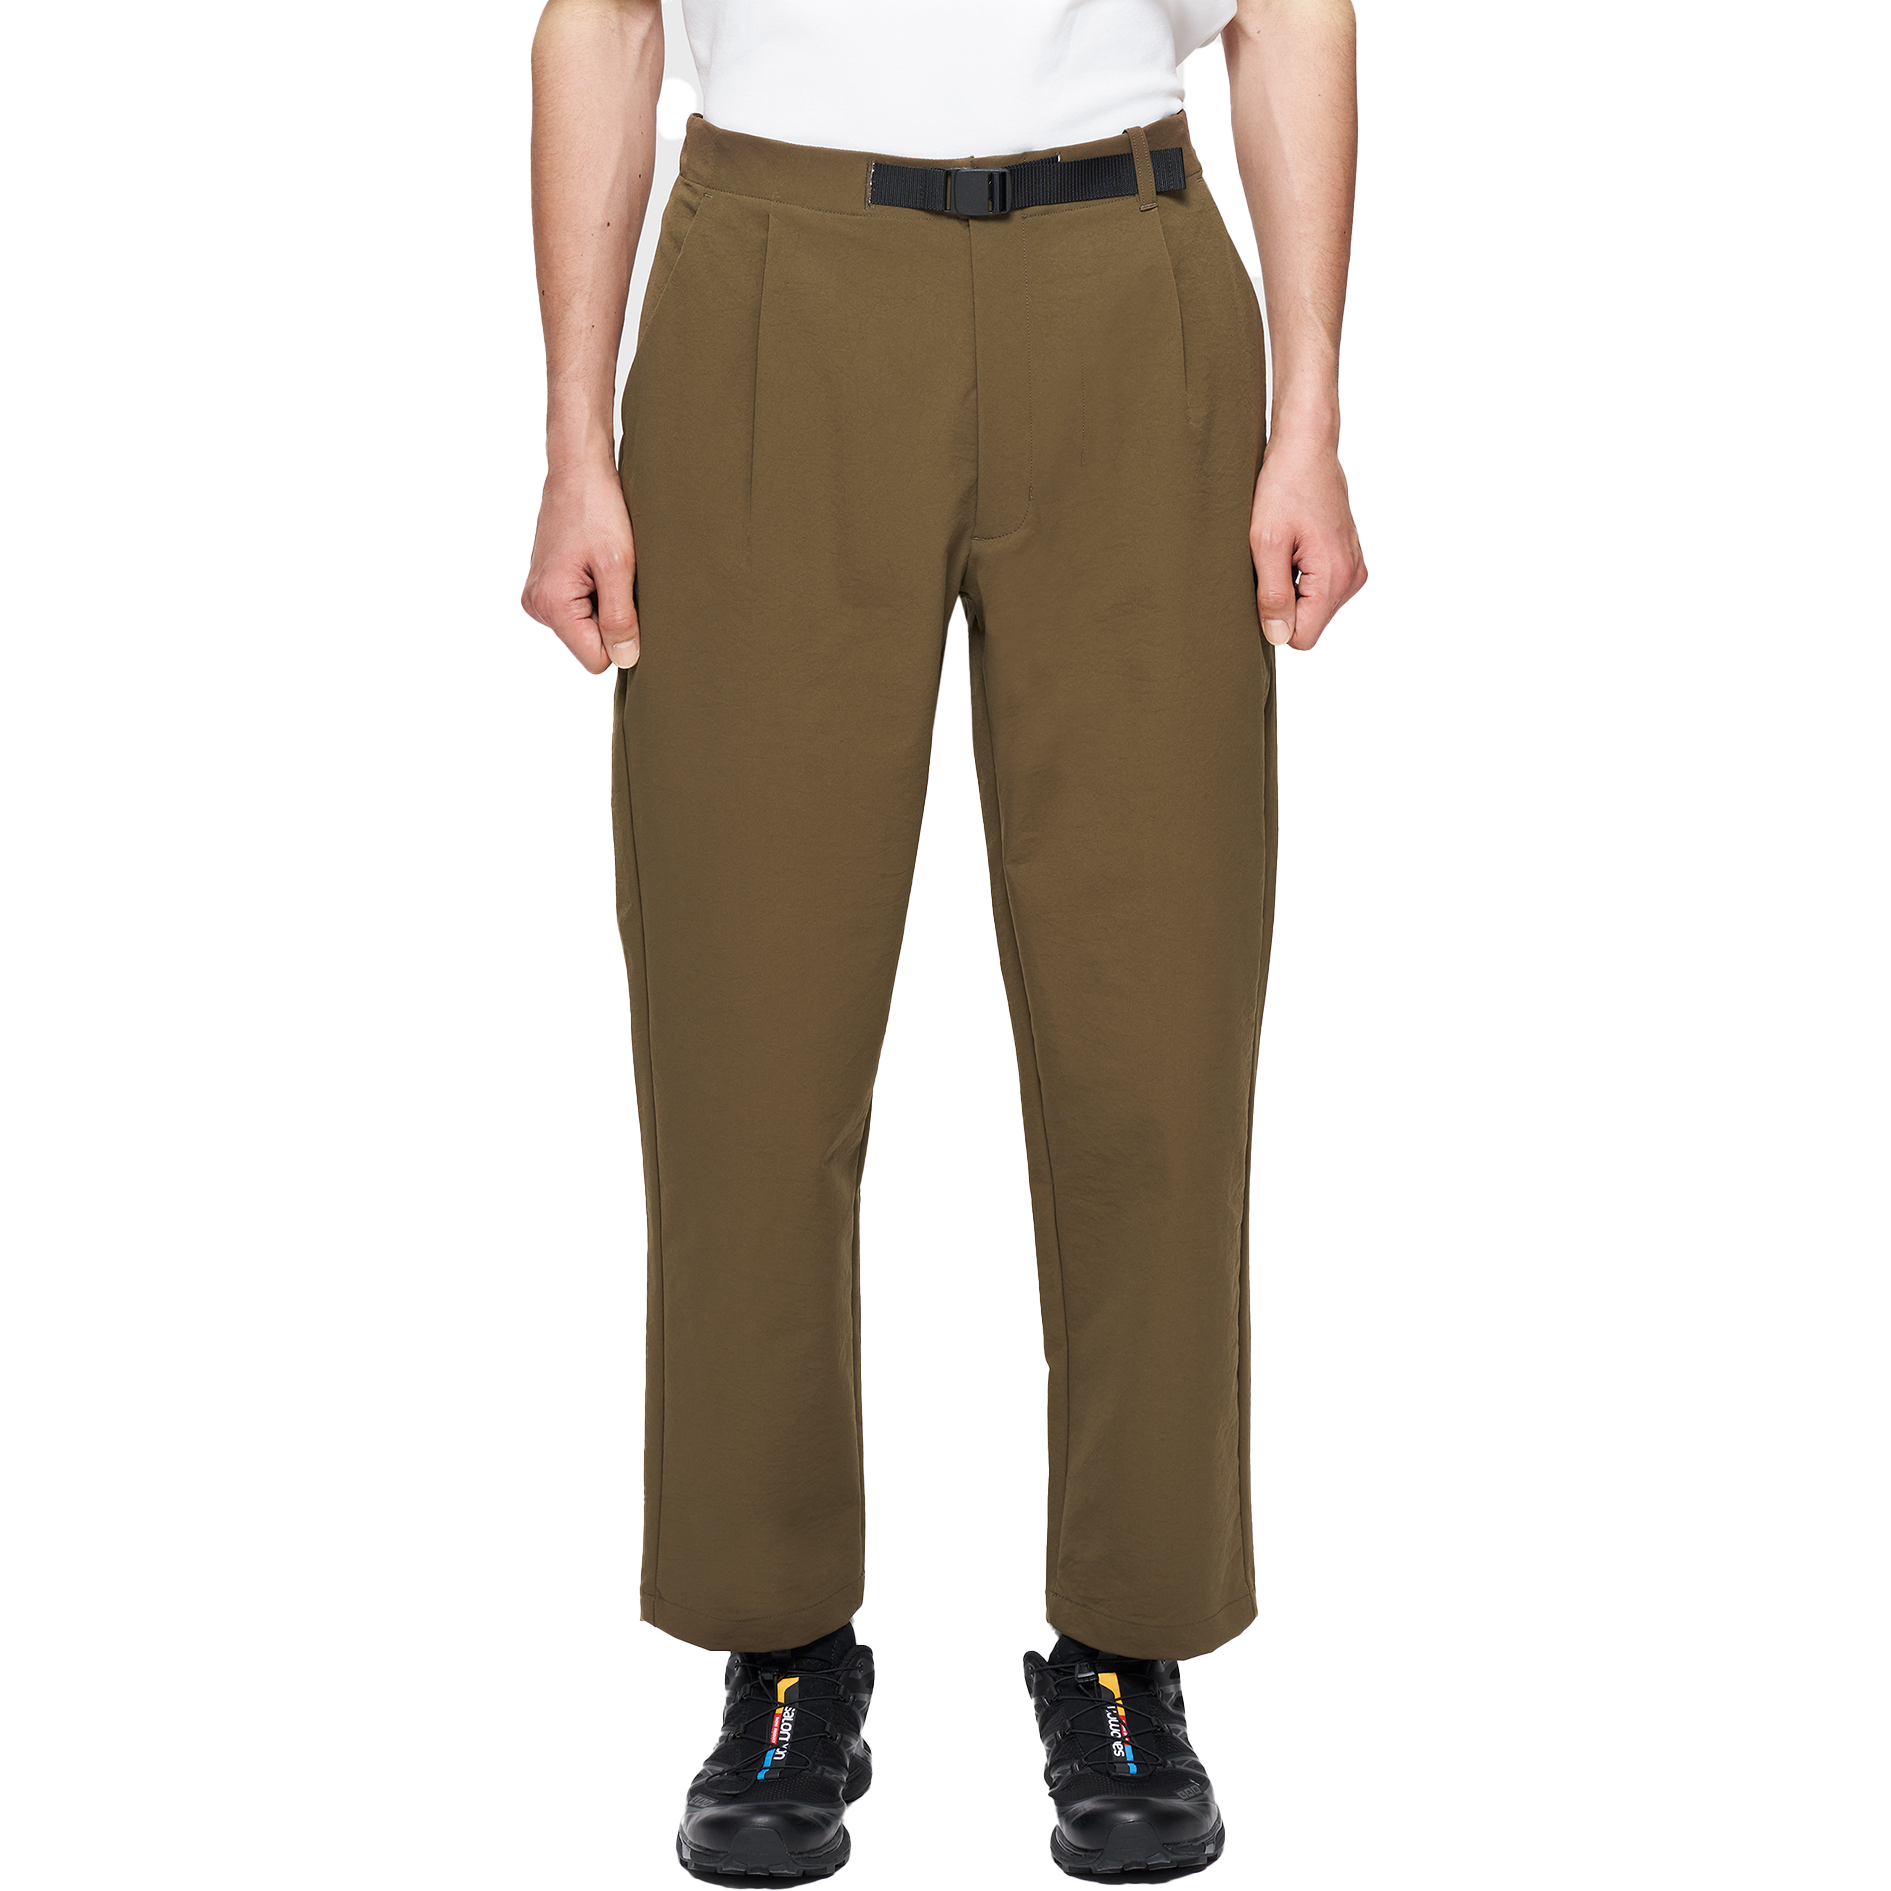 Goldwin U Pants X-Small One Tuck Tapered Pant, Dark Taupe